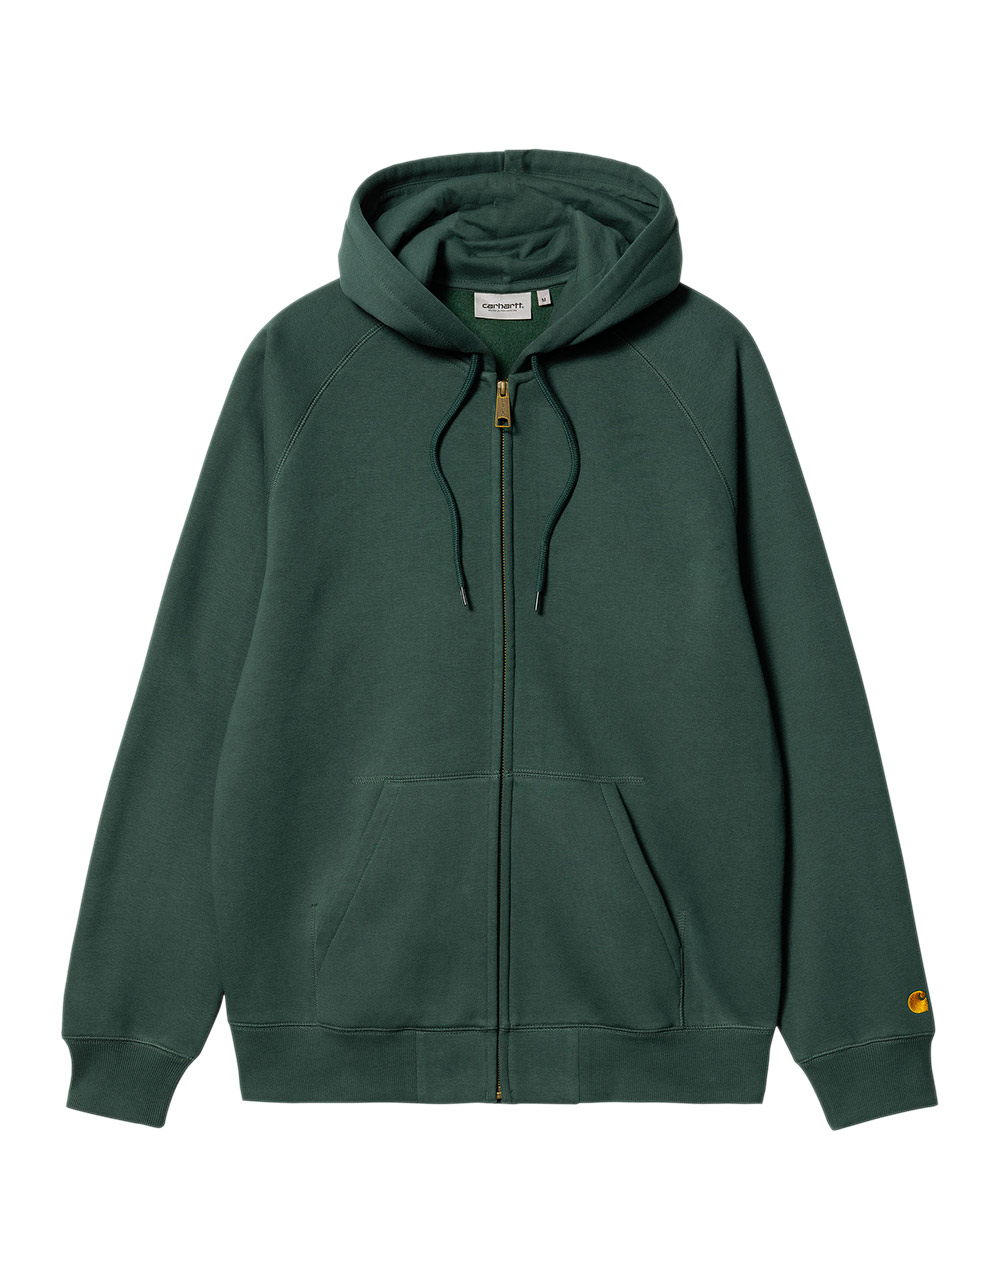 Carhartt WIP – Hooded Chase Jacket